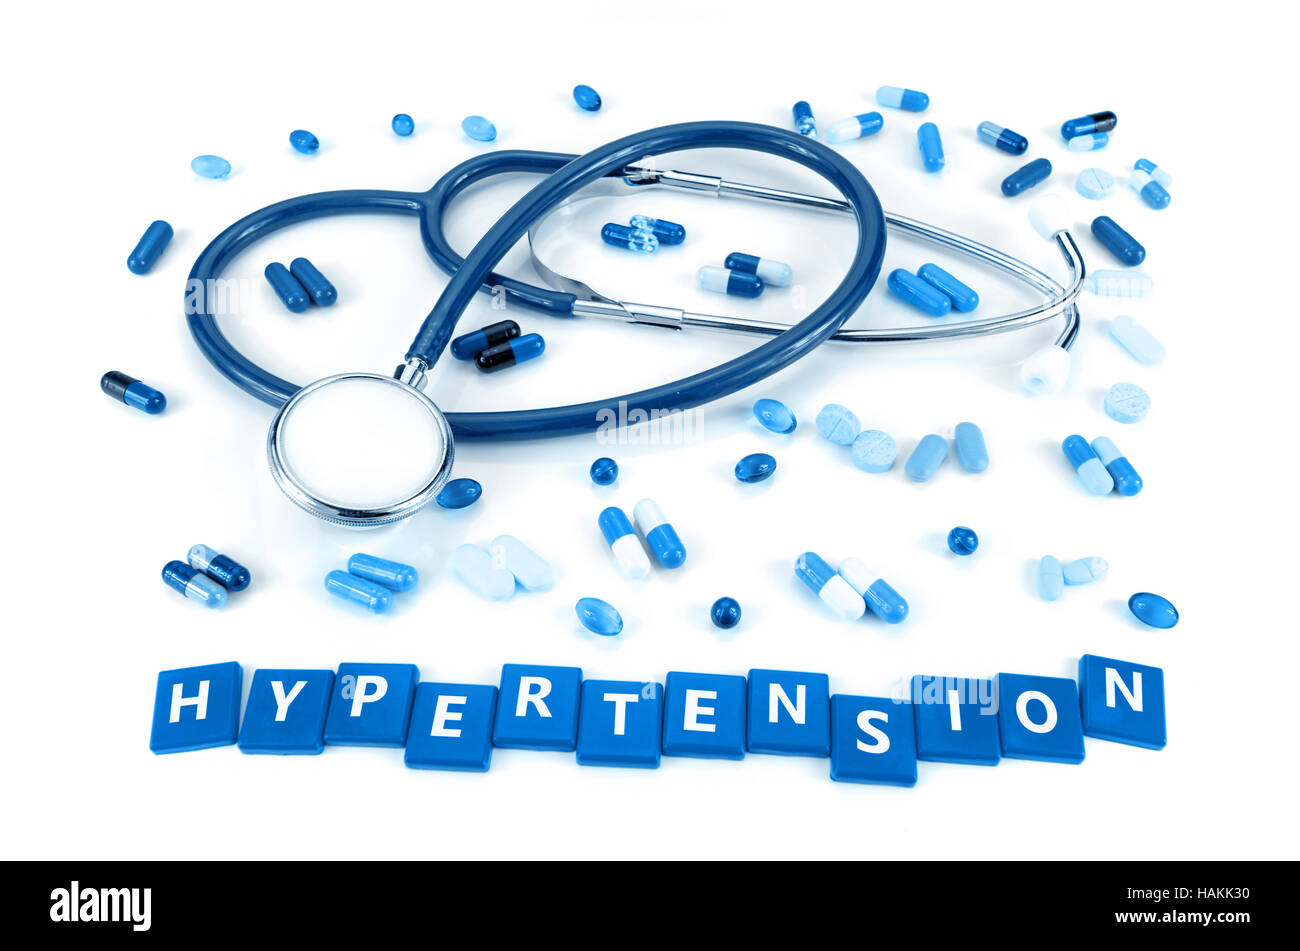 Hypertension treatment concept with stethoscope and various kind of oral merication on white background. Stock Photo